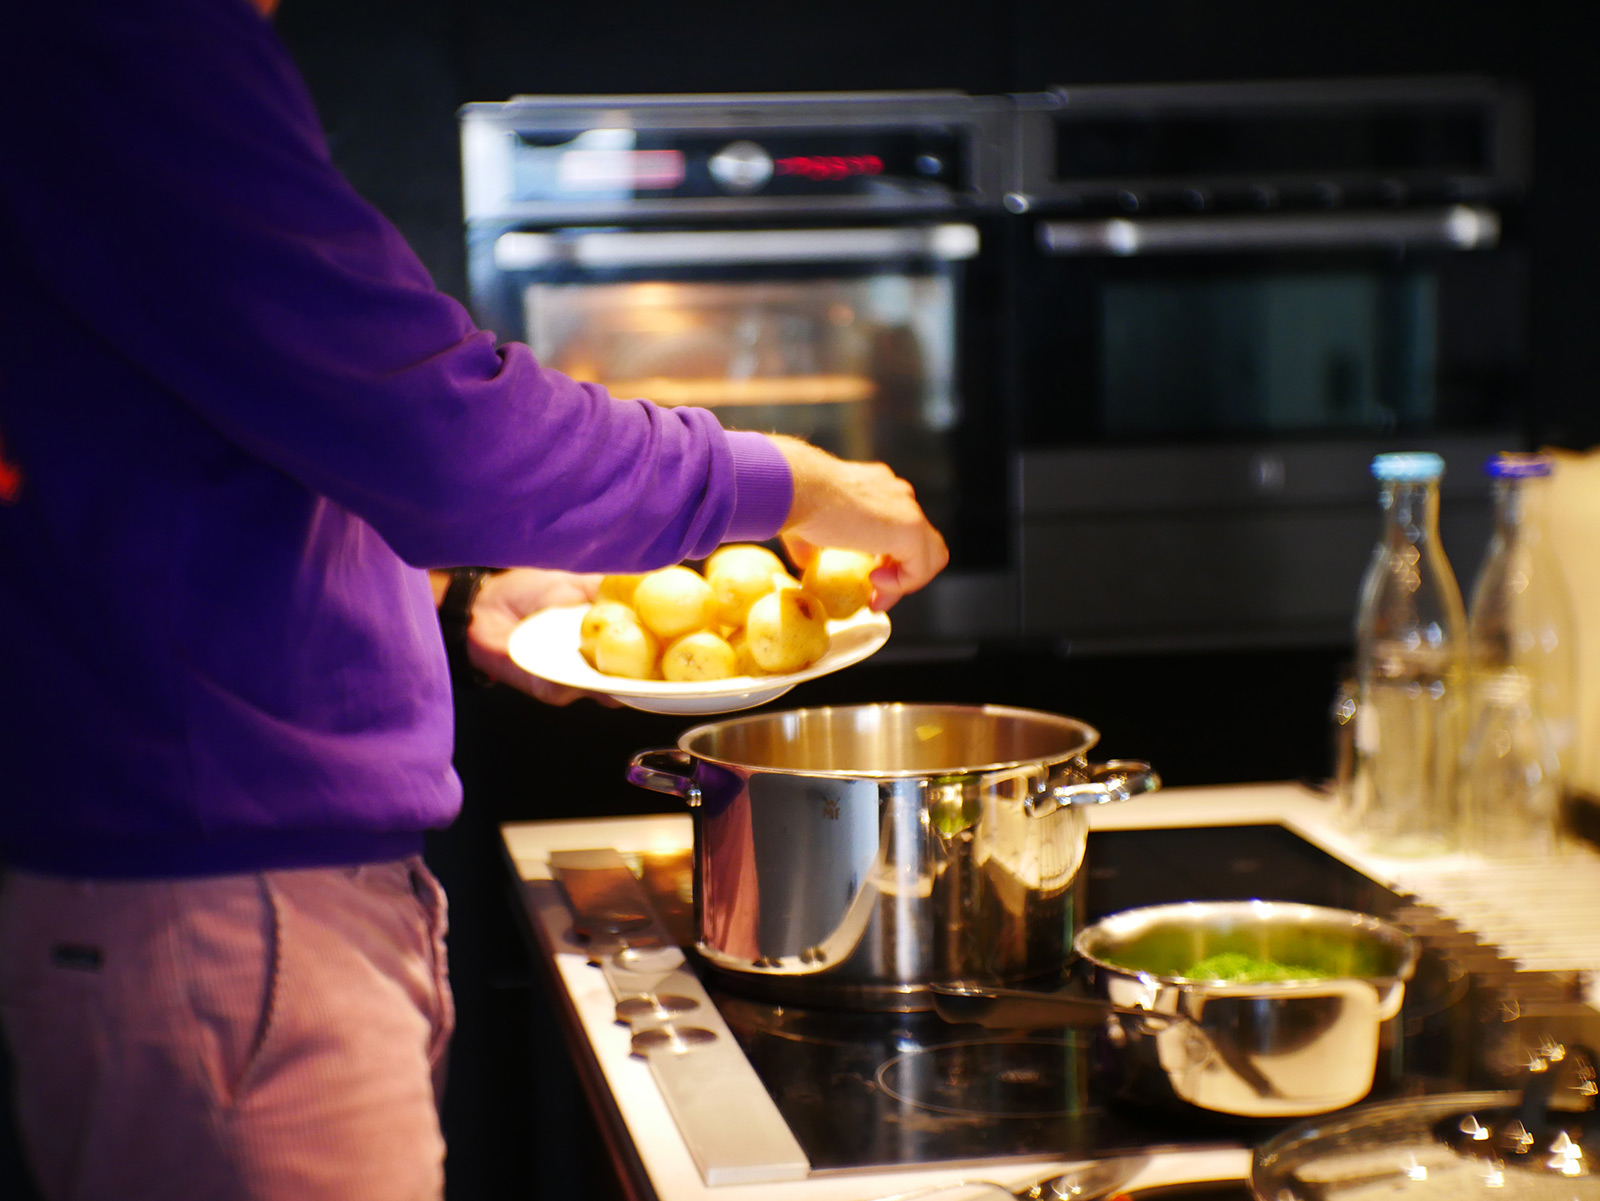 Cooking potatoes at home.